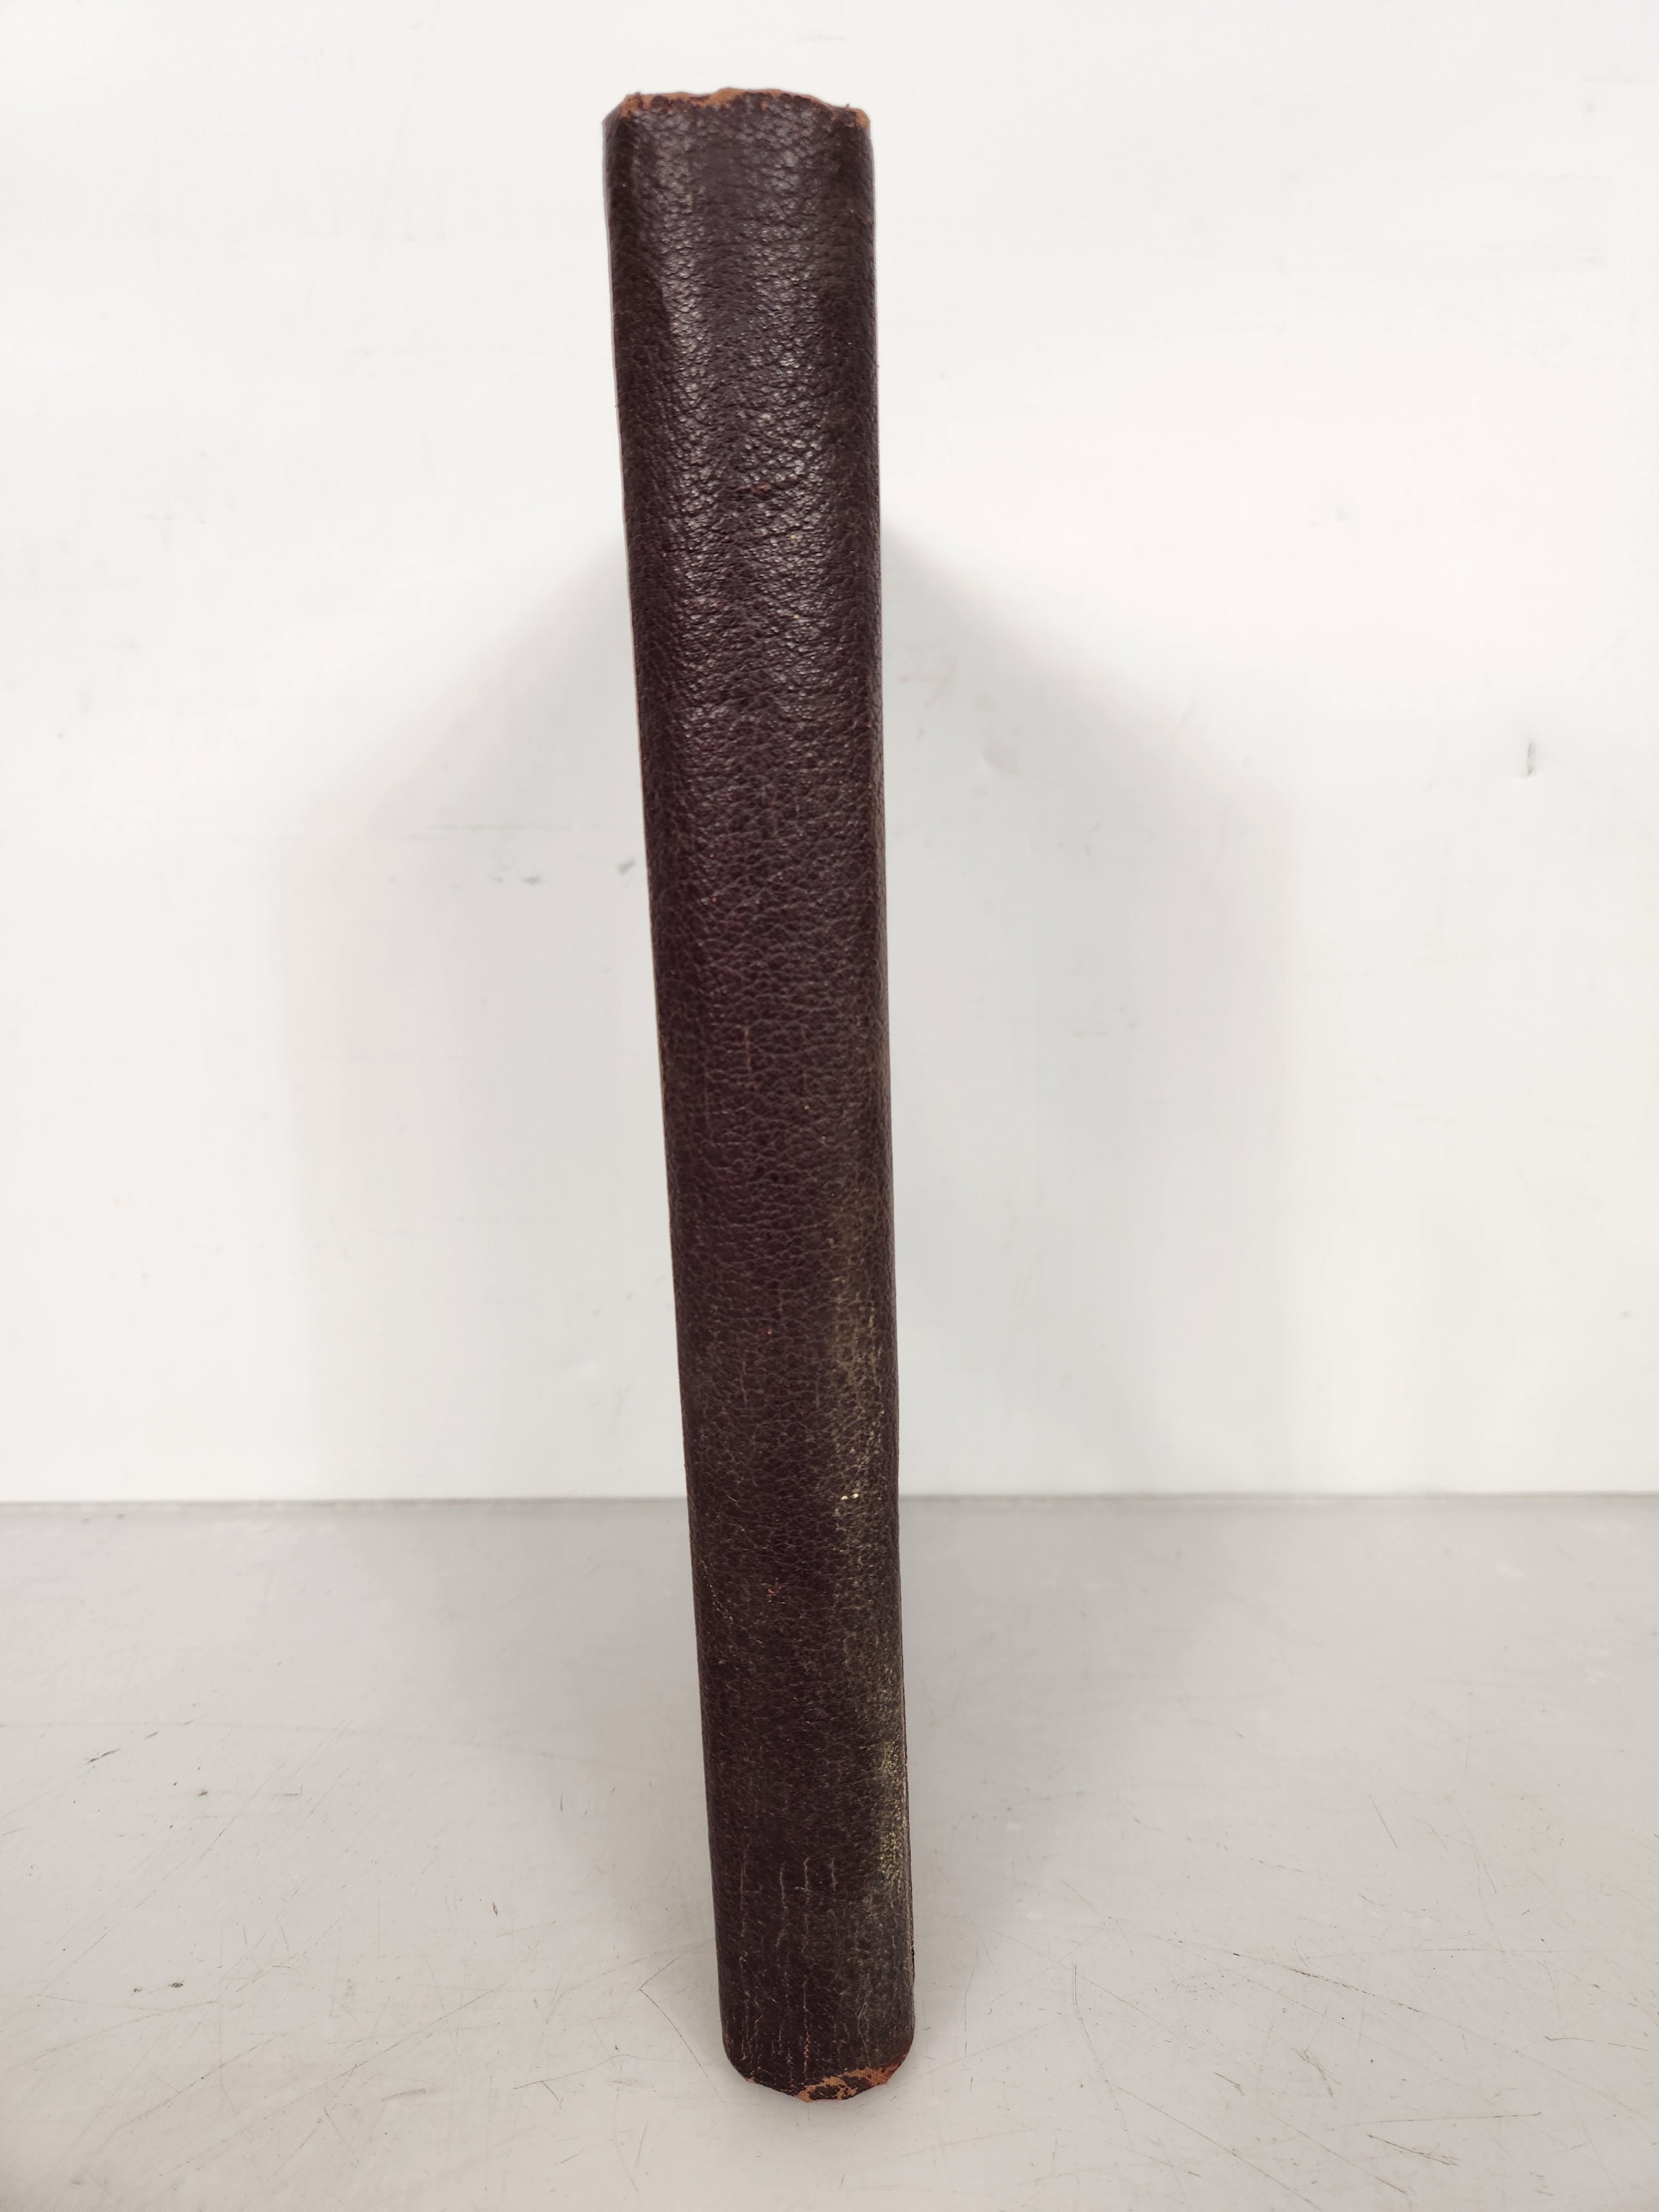 1919 Michigan Agricultural College Yearbook Wolverine